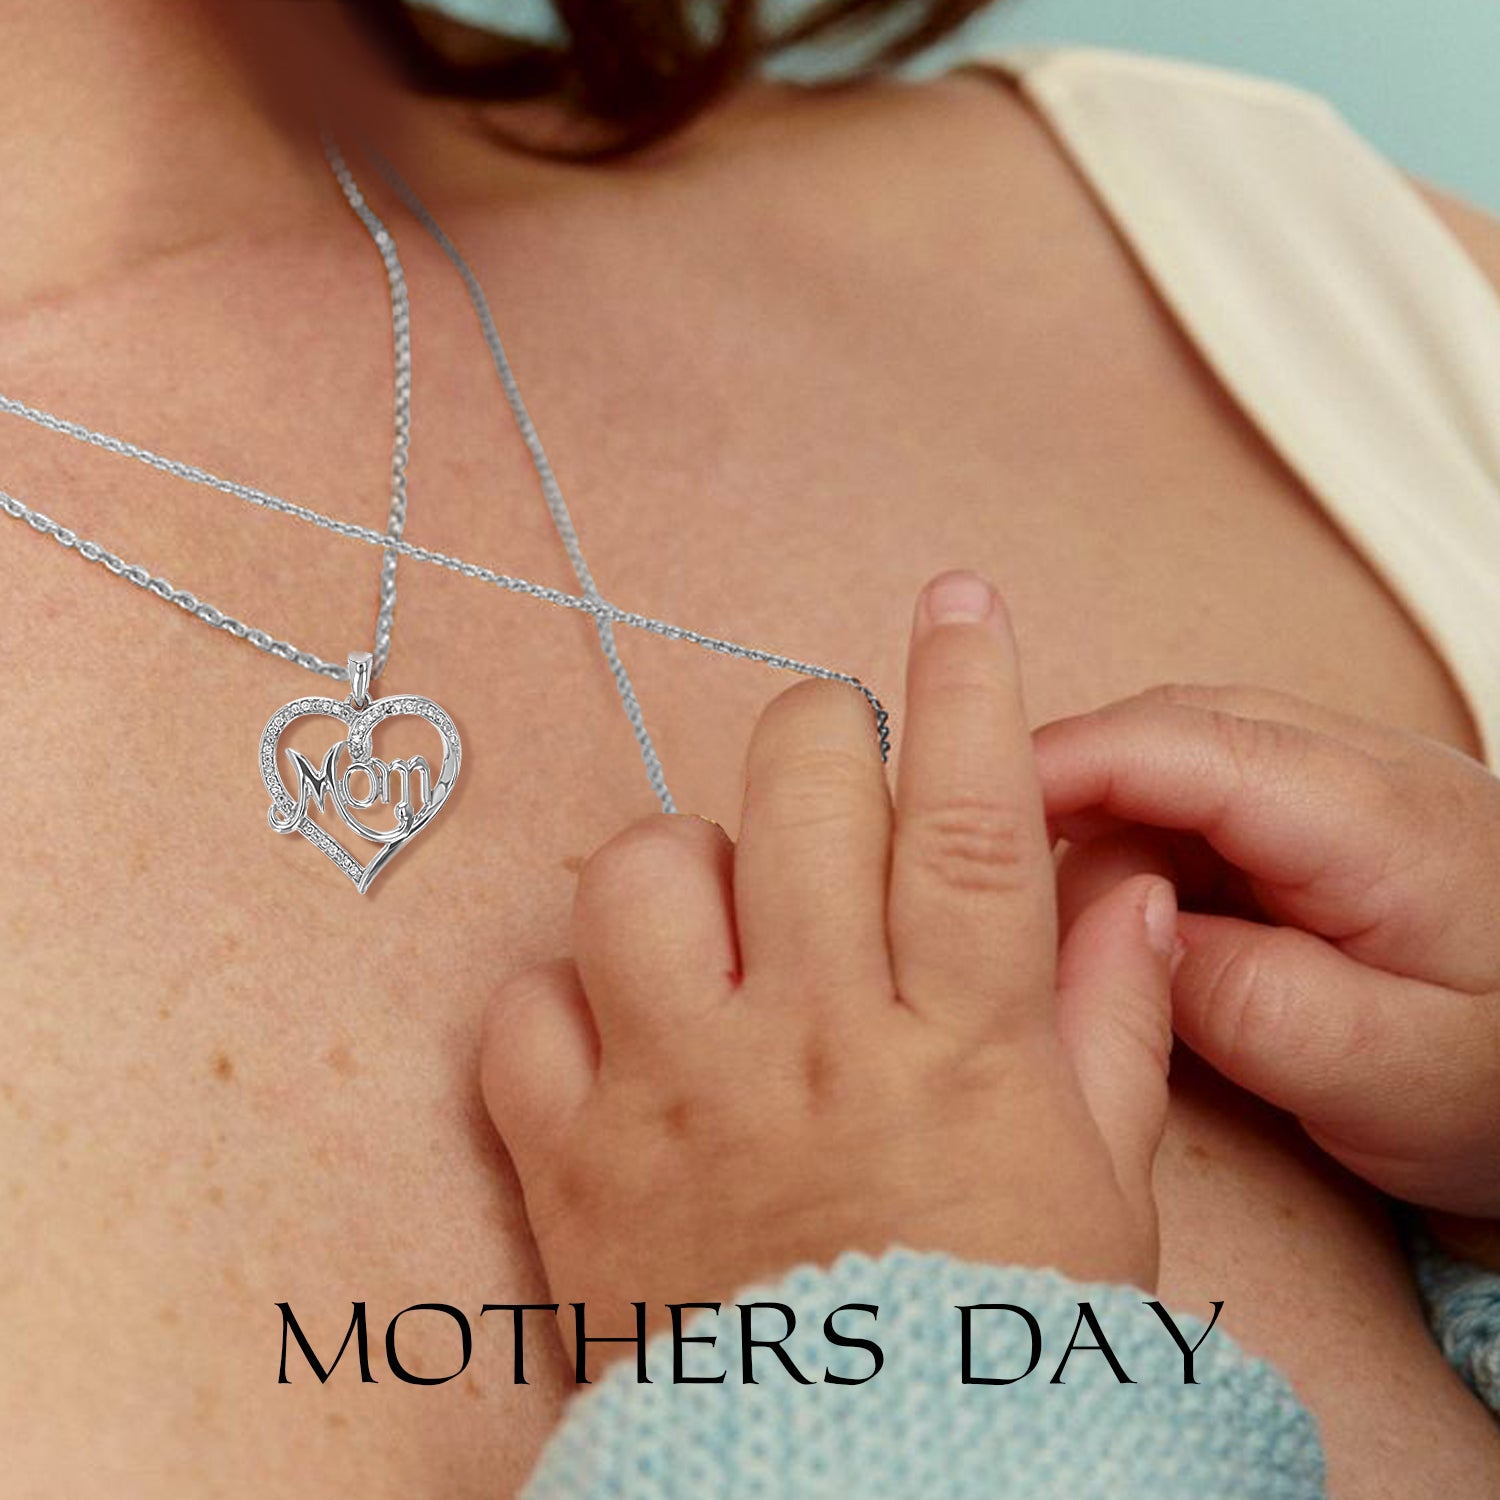 Mother's Day Gifts for the Mom Who Deserves the Best